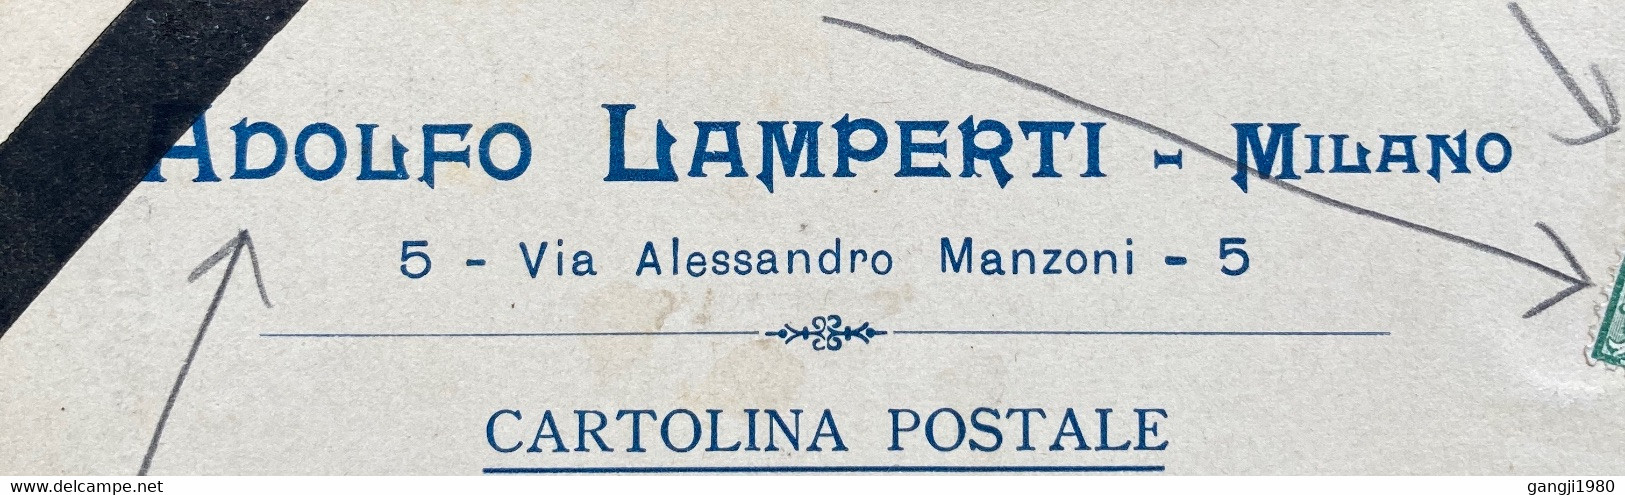 ITALY “CASTELROSSO” 1905 OVERPRINED BLACK ON KING STAMP,ADOLFO LAMPERT PRIVATE FIRM,MILANO CITY SQUARE CANCELLATION - Castelrosso